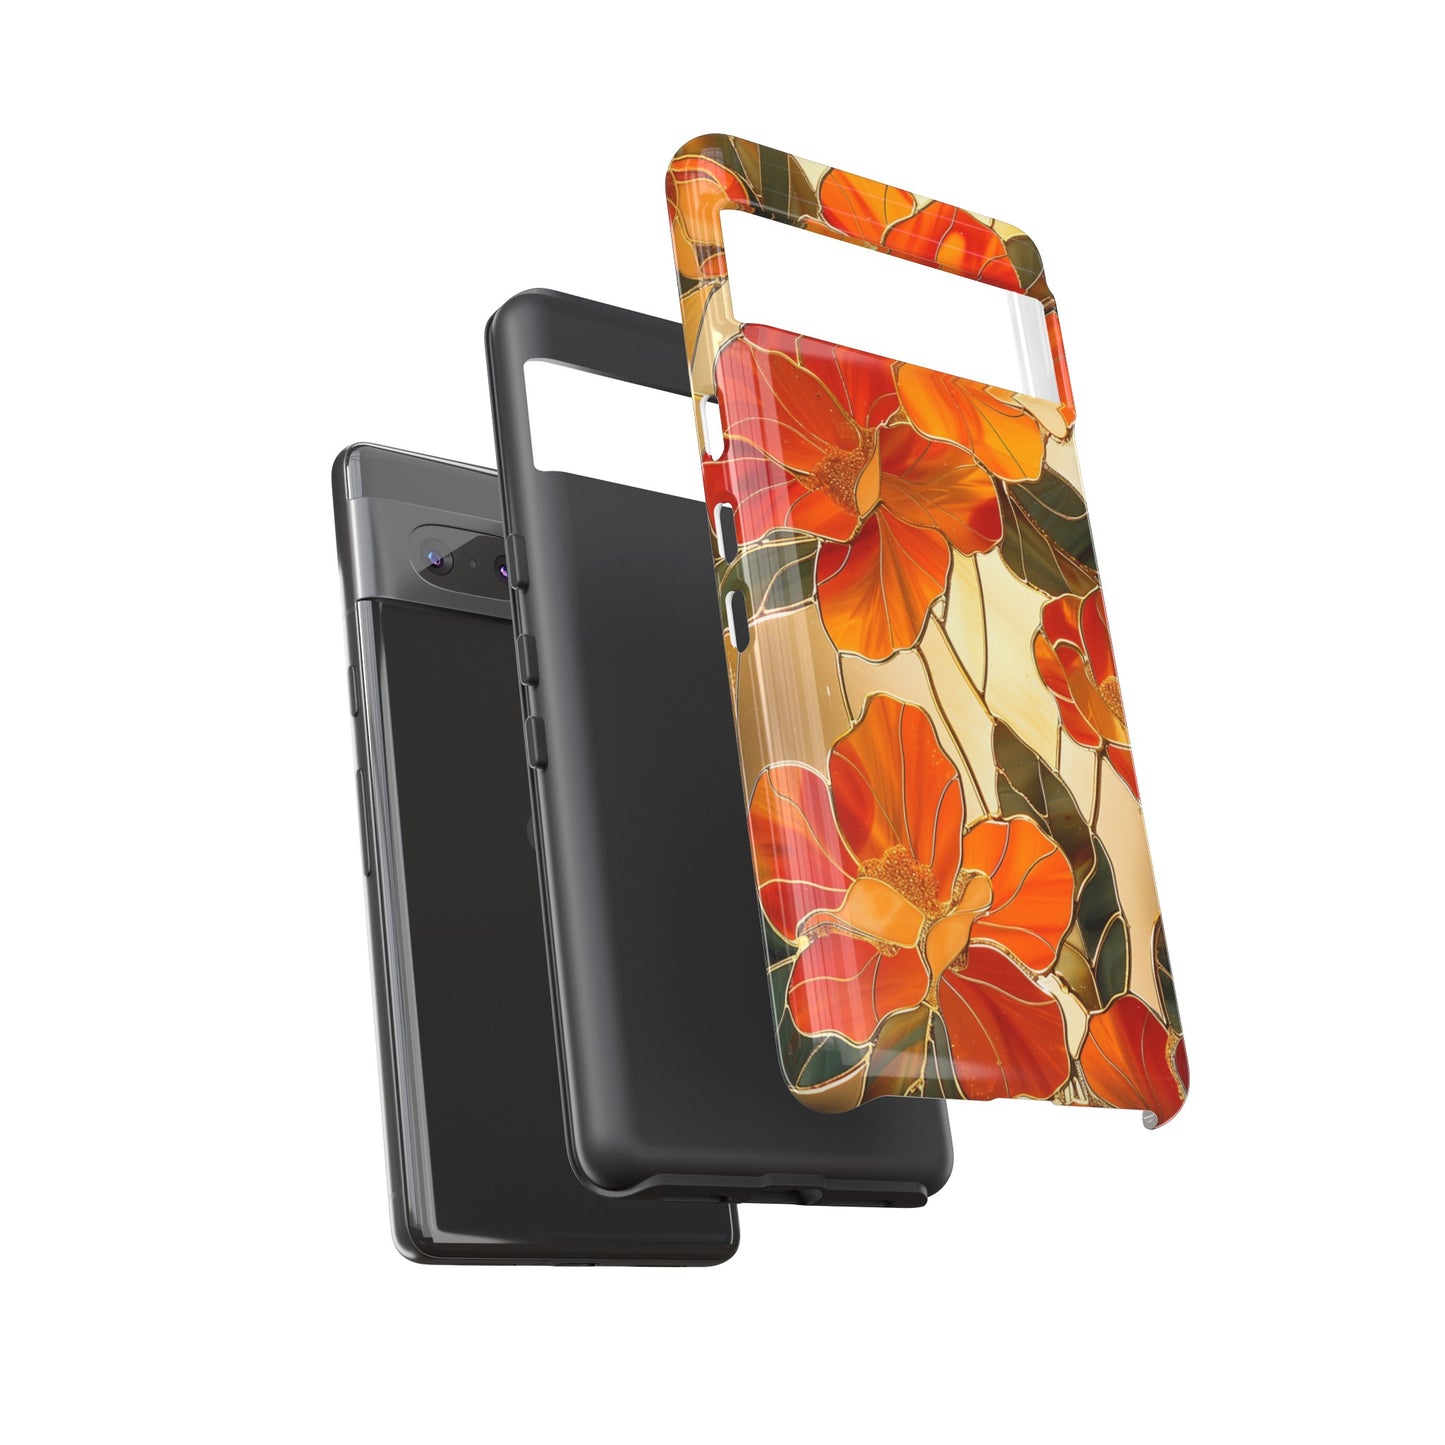 Orange Floral Phone Case Stained Glass Flower Aesthetic